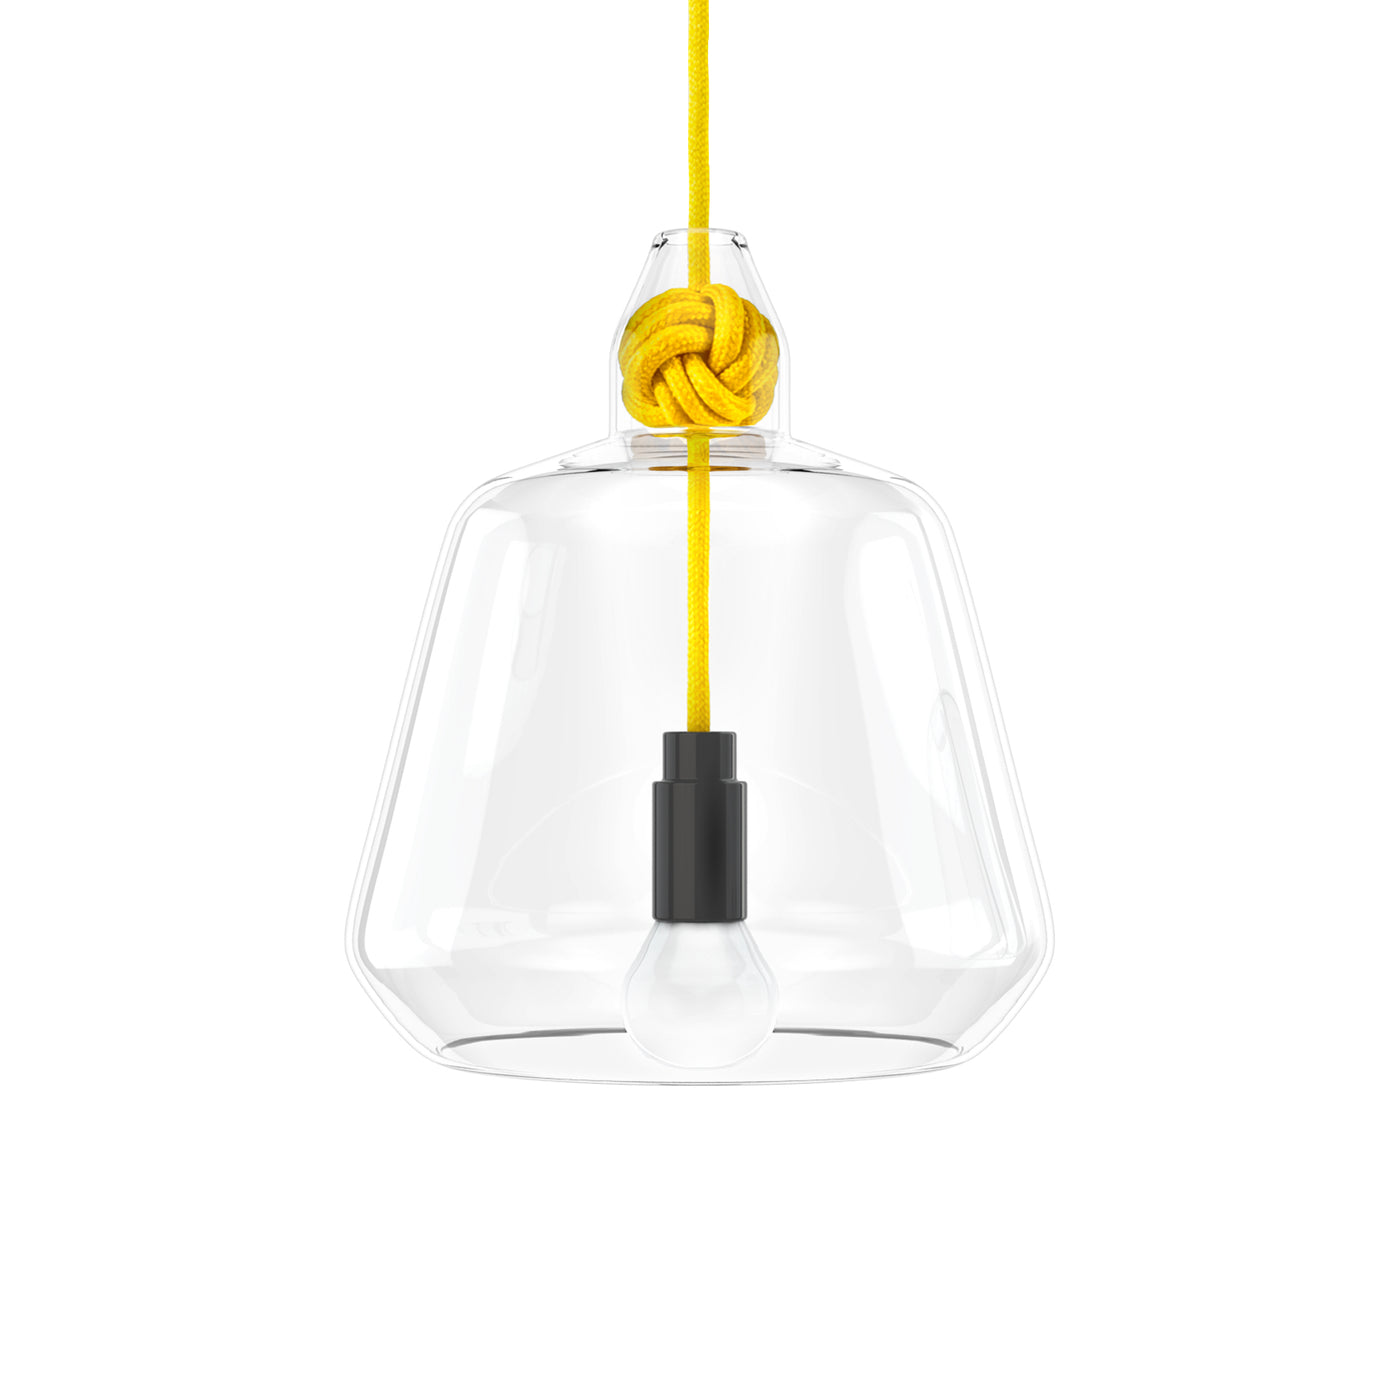 Vitamin Large Knot Pendant Lamp in yellow. Buy now from someday designs